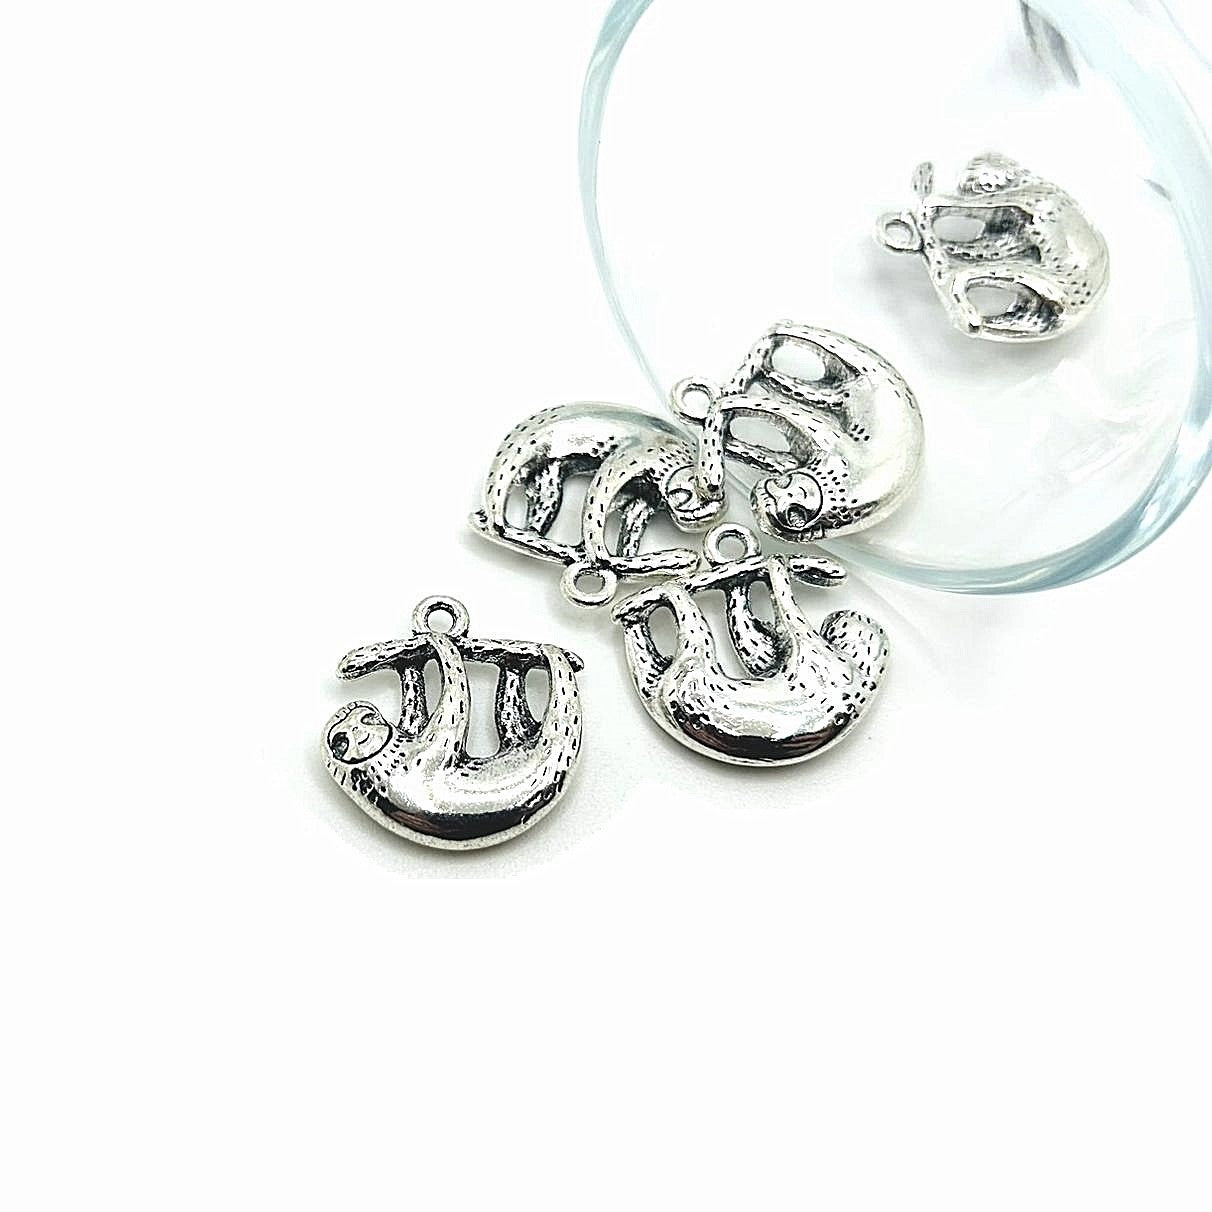 4, 20 or 50 Pieces: Silver Sloth on Branch Charms, Double Sided